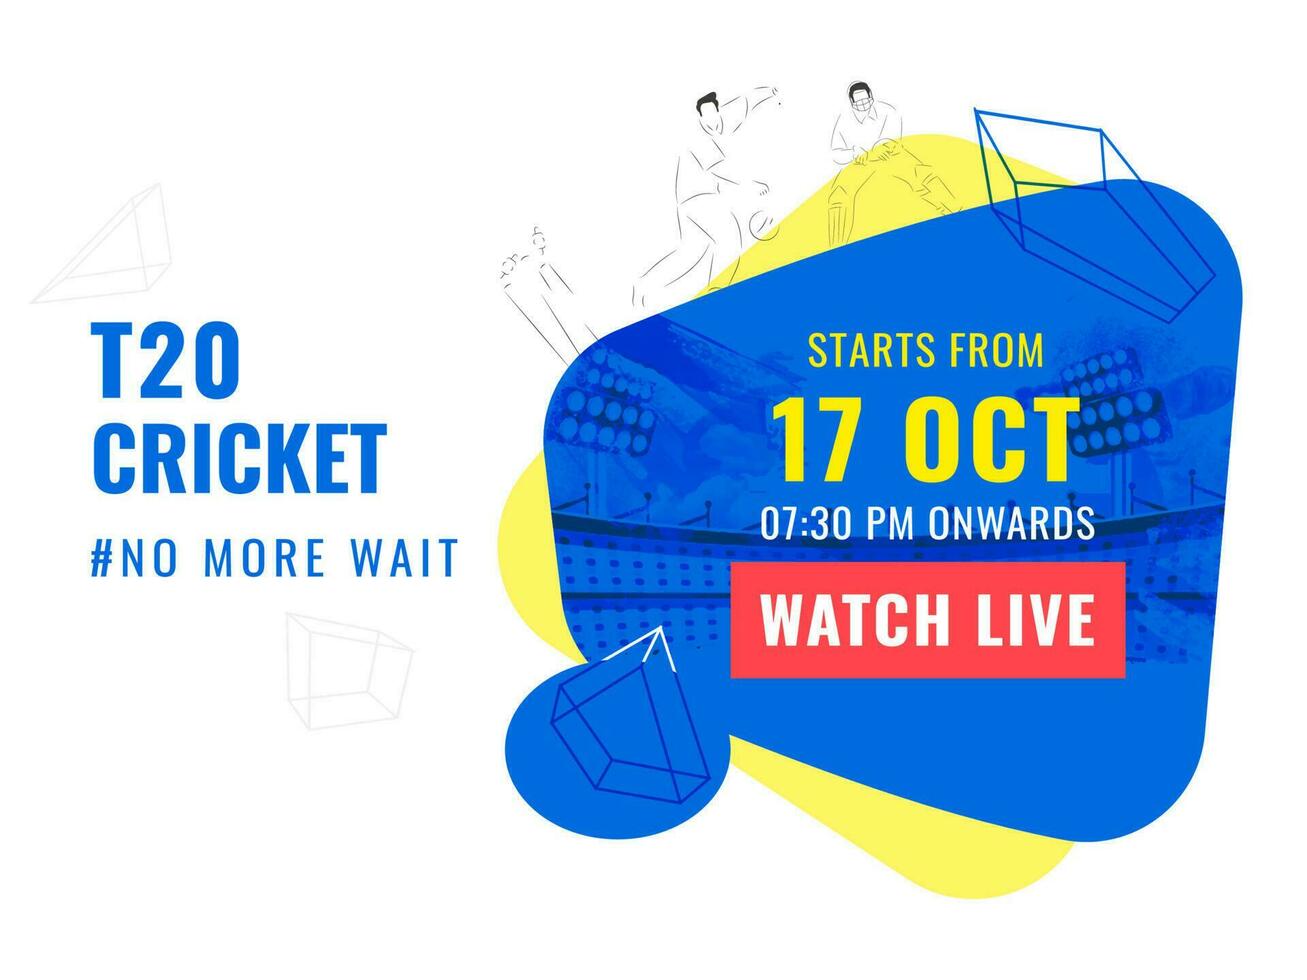 T20 Cricket Watch Live Poster Design For Advertising. vector